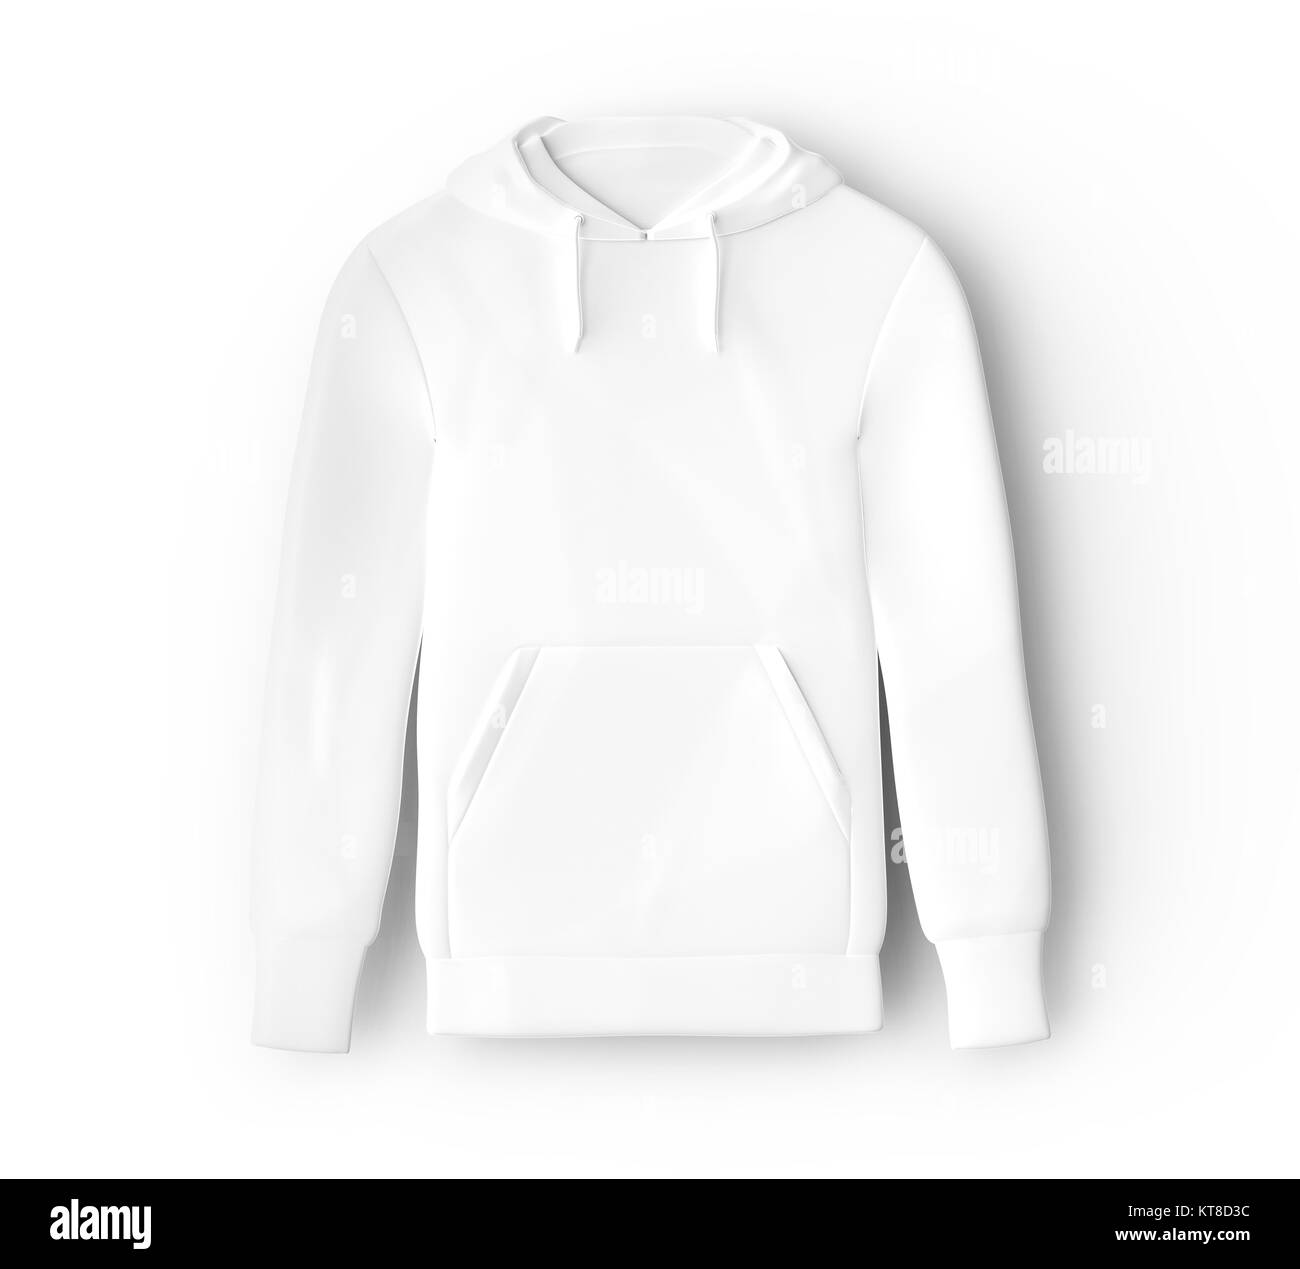 Hoodie sweatshirt mockup, blank white cloth template for men isolated on white background, 3d render Stock Photo